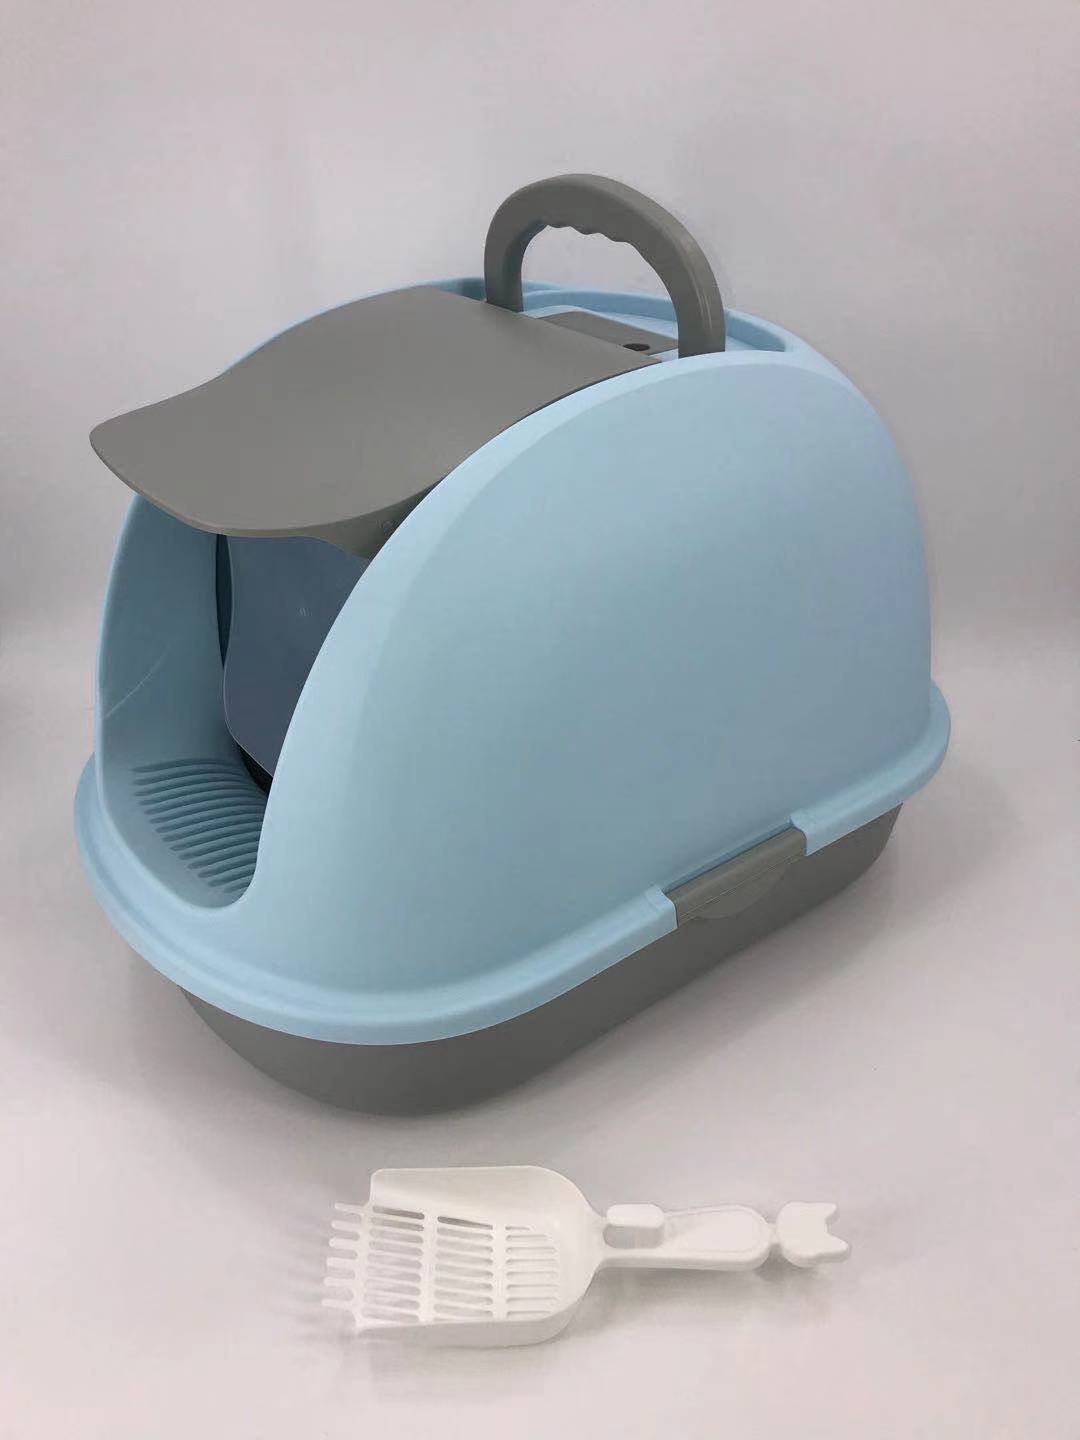 YES4PETS XL Portable Hooded Cat Toilet Litter Box Tray House w Charcoal Filter and Scoop Blue